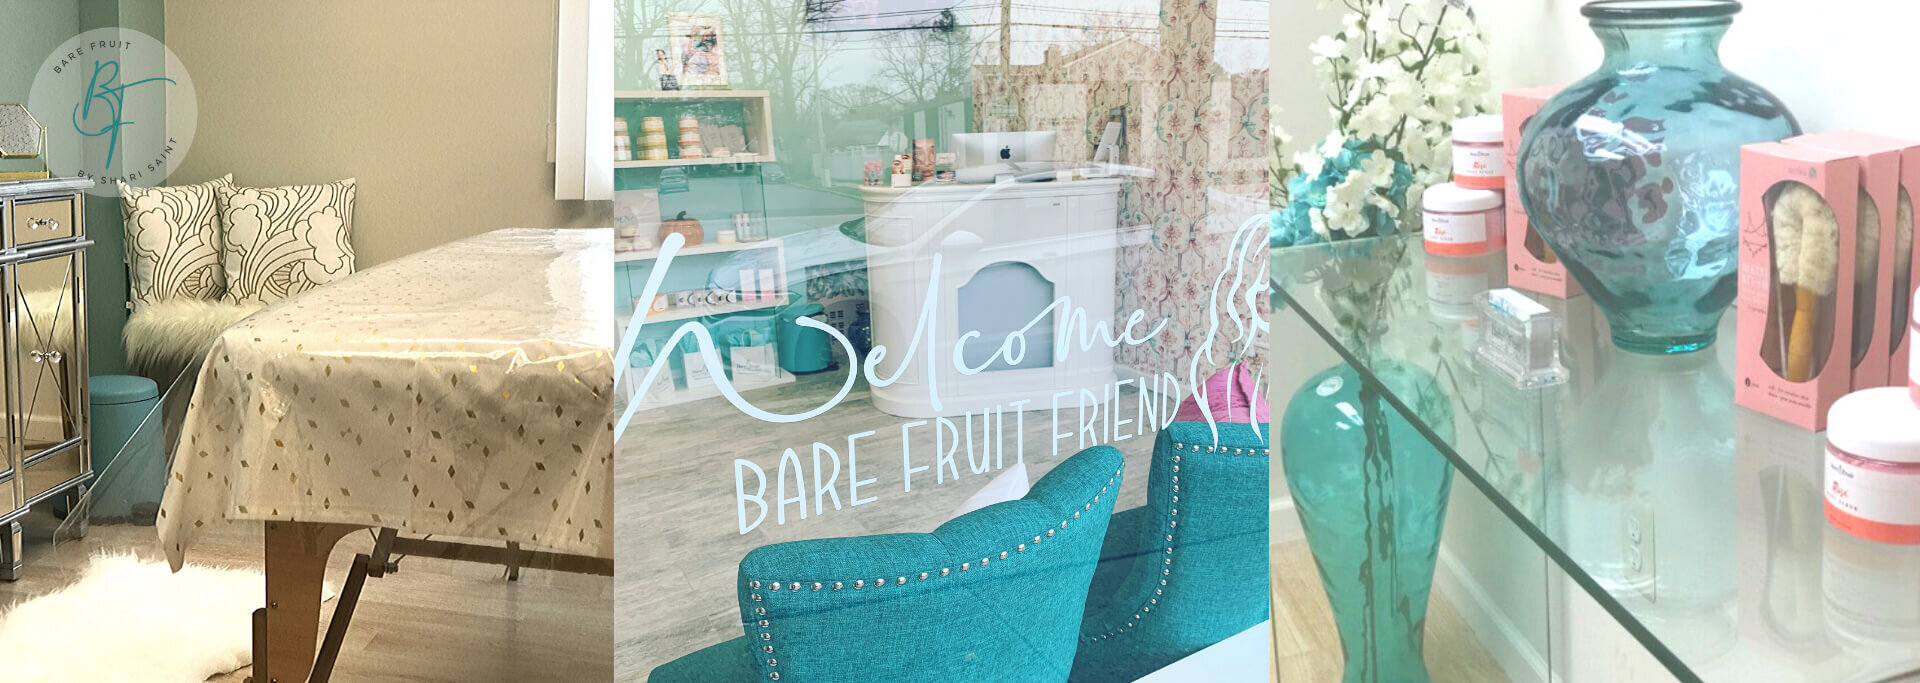 Photos from the three Long Island locations of Bare Fruit Sugaring salons: Welcome Bare Fruit Friend!